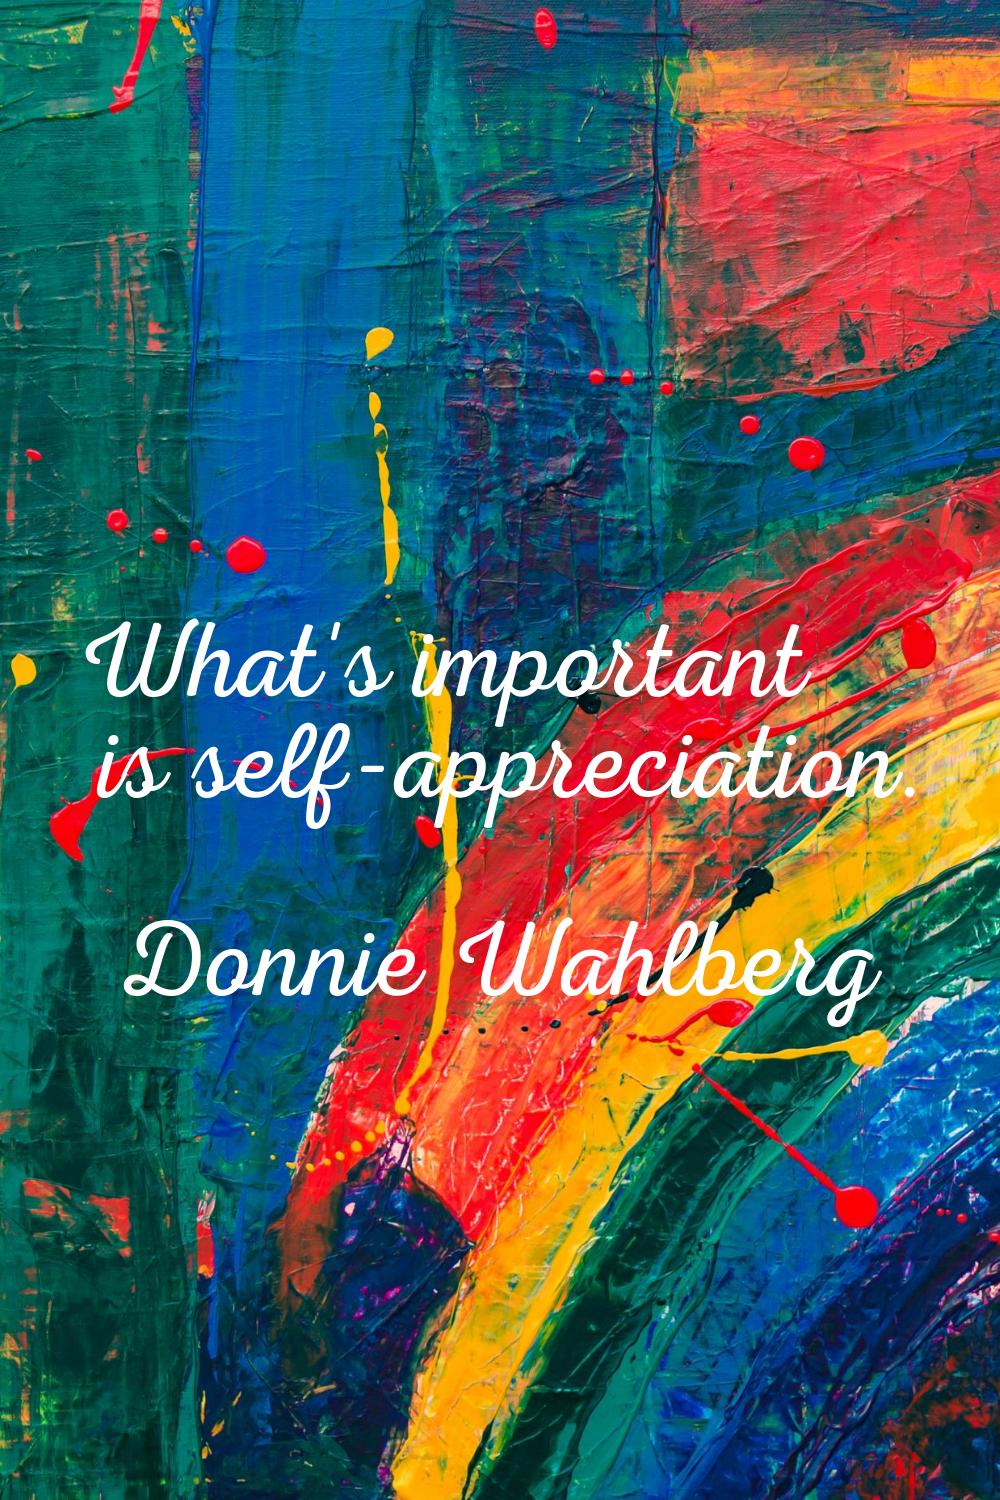 What's important is self-appreciation.